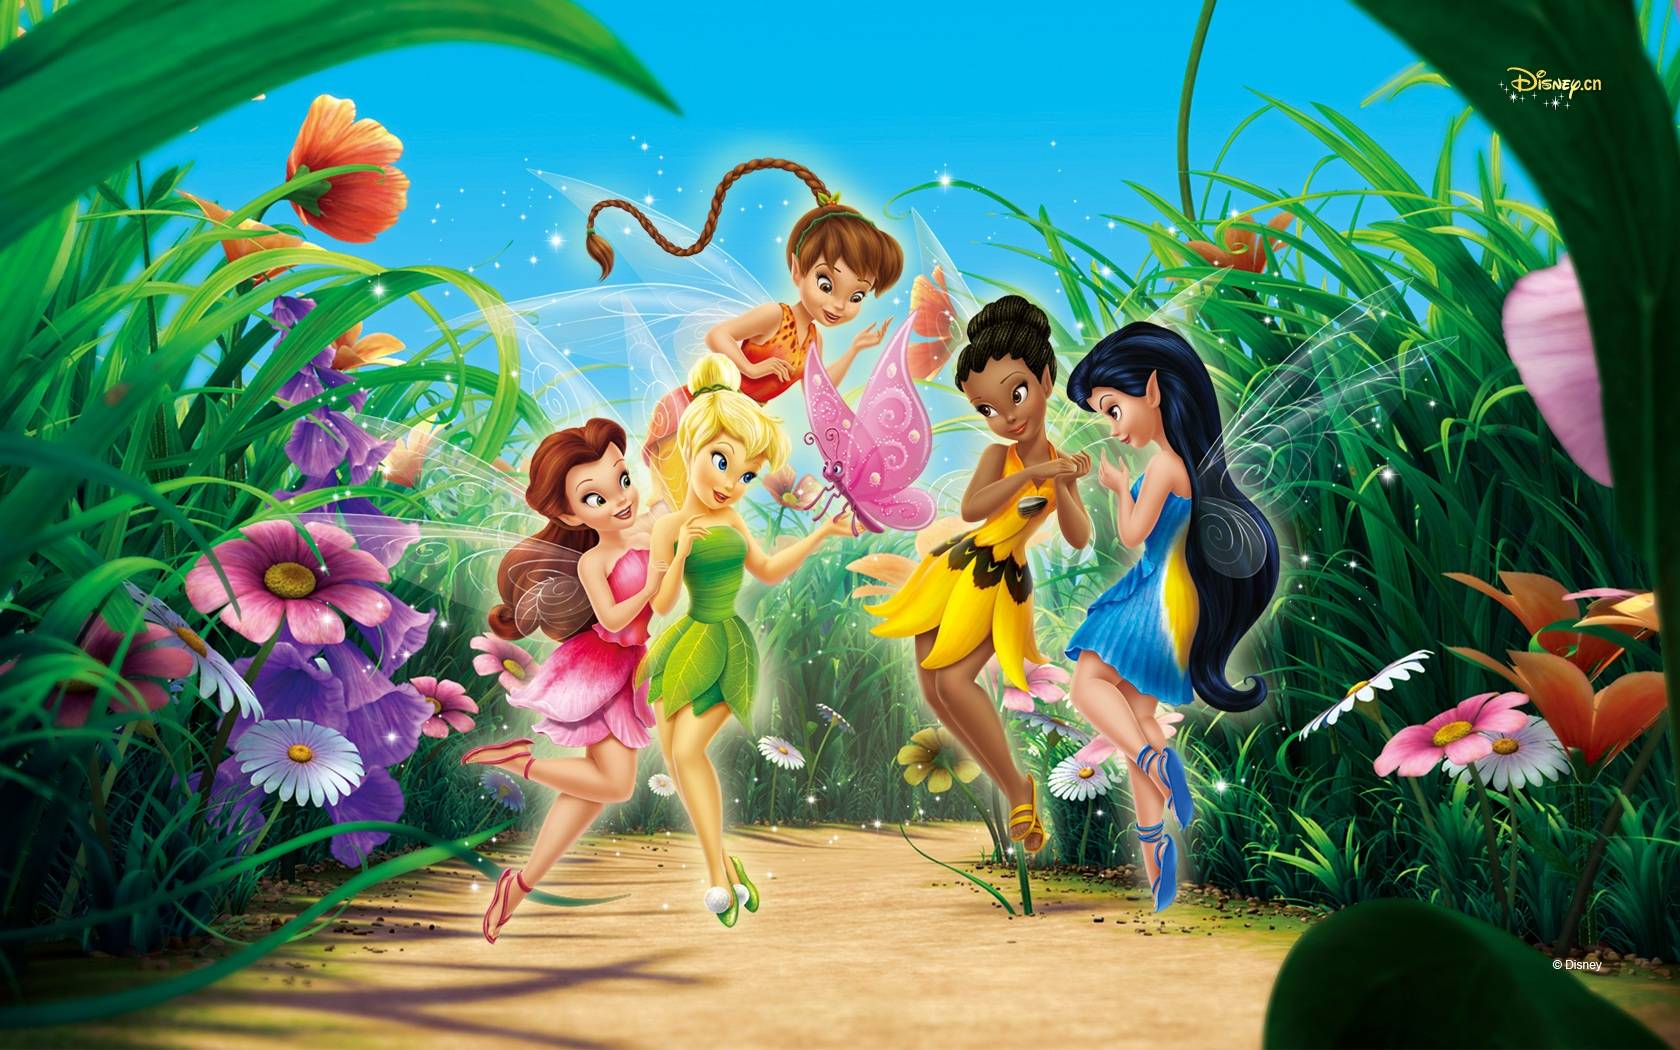 Tinkerbell iPhone 4s Wallpaper Photo